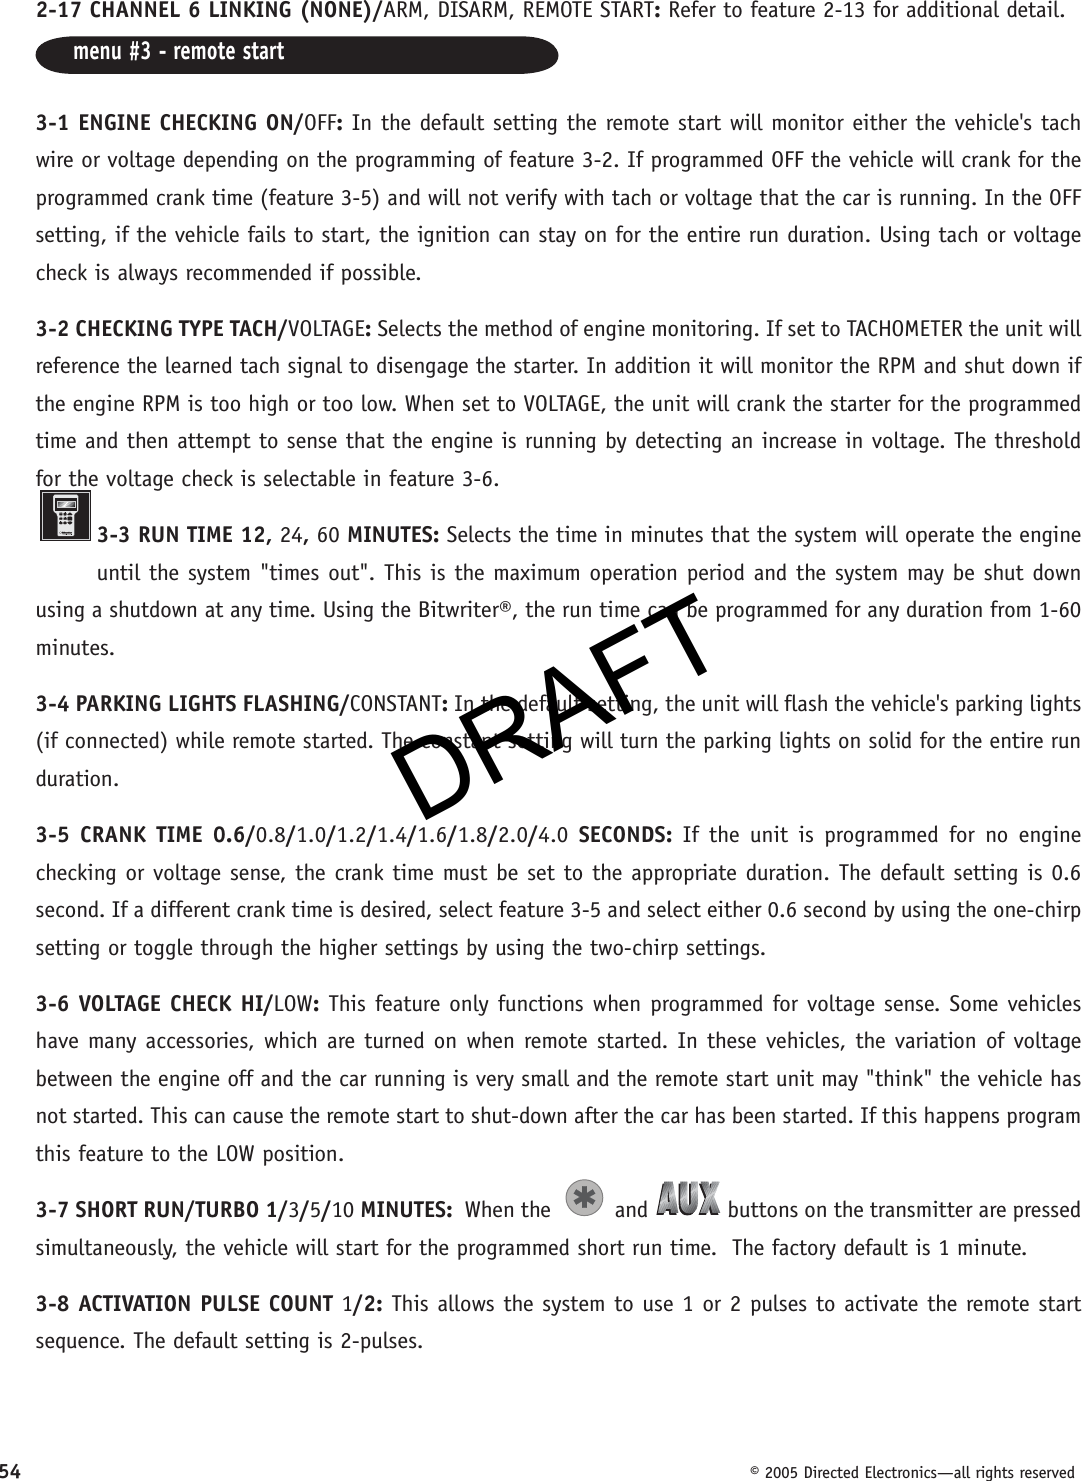 DRAFT54  © 2005 Directed Electronics—all rights reserved2-17 CHANNEL 6 LINKING (NONE)/ARM, DISARM, REMOTE START: Refer to feature 2-13 for additional detail.menu #3 - remote start 3-1 ENGINE CHECKING ON/OFF: In the default setting the remote start will monitor either the vehicle&apos;s tach wire or voltage depending on the programming of feature 3-2. If programmed OFF the vehicle will crank for the programmed crank time (feature 3-5) and will not verify with tach or voltage that the car is running. In the OFF setting, if the vehicle fails to start, the ignition can stay on for the entire run duration. Using tach or voltage check is always recommended if possible.3-2 CHECKING TYPE TACH/VOLTAGE: Selects the method of engine monitoring. If set to TACHOMETER the unit will reference the learned tach signal to disengage the starter. In addition it will monitor the RPM and shut down if the engine RPM is too high or too low. When set to VOLTAGE, the unit will crank the starter for the programmed time and then attempt to sense that the engine is running by detecting an increase in voltage. The threshold for the voltage check is selectable in feature 3-6.3-3 RUN TIME 12, 24, 60 MINUTES: Selects the time in minutes that the system will operate the engine until the system &quot;times out&quot;. This is the maximum operation period and the system may be shut down using a shutdown at any time. Using the Bitwriter®, the run time can be programmed for any duration from 1-60 minutes.3-4 PARKING LIGHTS FLASHING/CONSTANT: In the default setting, the unit will flash the vehicle&apos;s parking lights (if connected) while remote started. The constant setting will turn the parking lights on solid for the entire run duration.3-5 CRANK TIME 0.6/0.8/1.0/1.2/1.4/1.6/1.8/2.0/4.0 SECONDS: If the unit is programmed for no engine checking or voltage sense, the crank time must be set to the appropriate duration. The default setting is 0.6 second. If a different crank time is desired, select feature 3-5 and select either 0.6 second by using the one-chirp setting or toggle through the higher settings by using the two-chirp settings.3-6 VOLTAGE CHECK HI/LOW: This feature only functions when programmed for voltage sense. Some vehicles have many accessories, which are turned on when remote started. In these vehicles, the variation of voltage between the engine off and the car running is very small and the remote start unit may &quot;think&quot; the vehicle has not started. This can cause the remote start to shut-down after the car has been started. If this happens program this feature to the LOW position.3-7 SHORT RUN/TURBO 1/3/5/10 MINUTES:  When the   and   buttons on the transmitter are pressed simultaneously, the vehicle will start for the programmed short run time.  The factory default is 1 minute.3-8 ACTIVATION PULSE COUNT 1/2: This allows the system to use 1 or 2 pulses to activate the remote start sequence. The default setting is 2-pulses.DRAFT